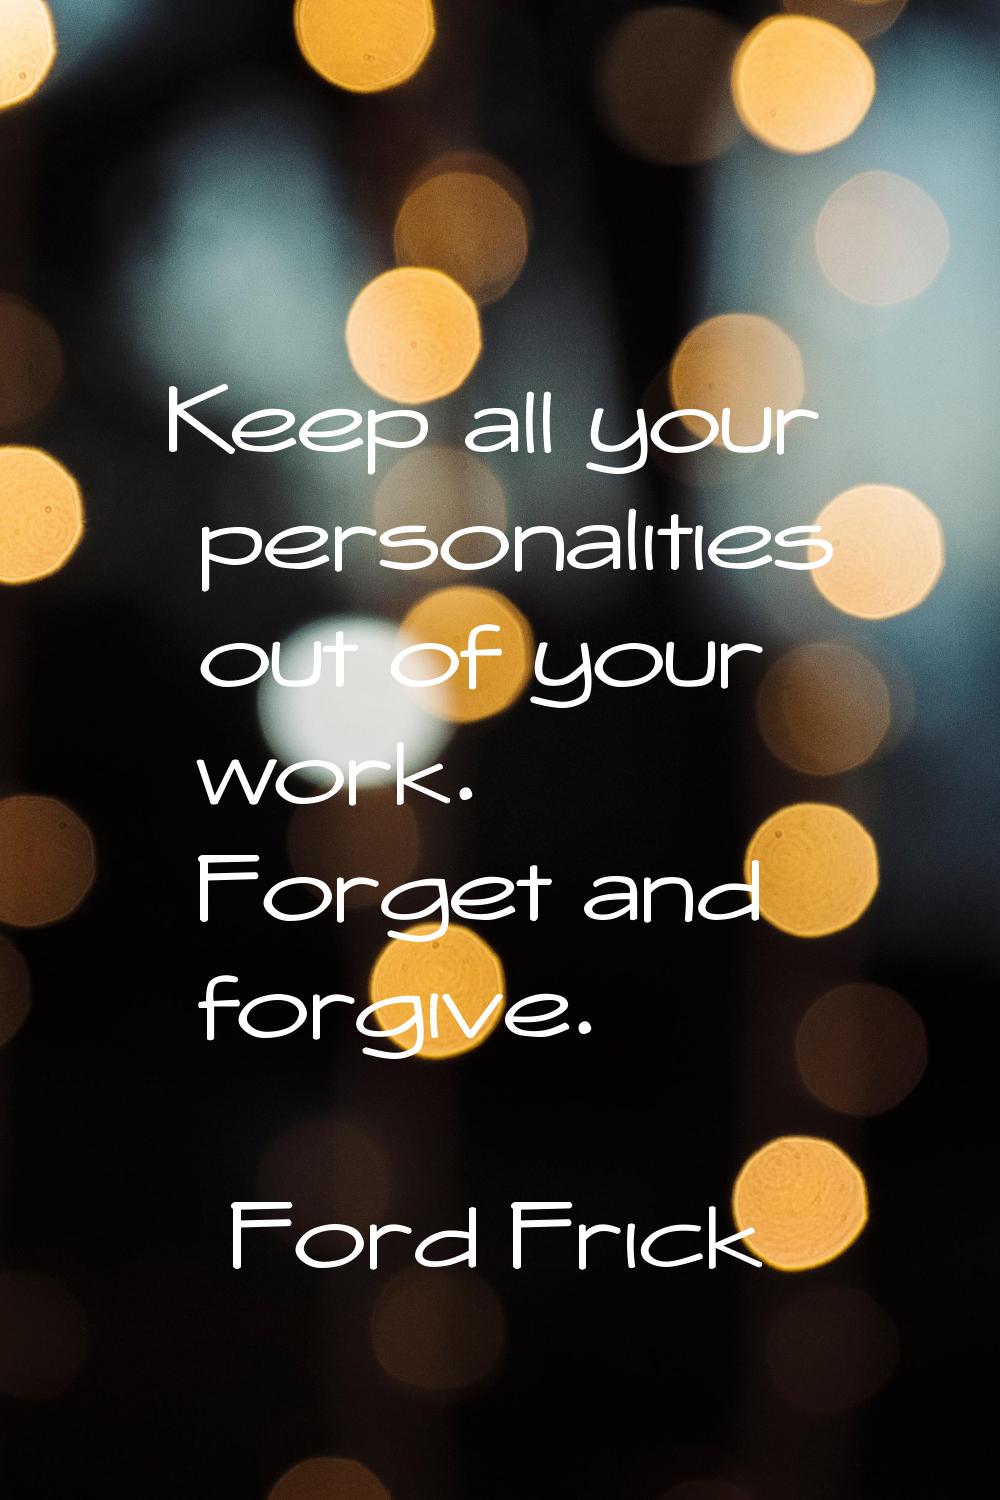 Keep all your personalities out of your work. Forget and forgive.